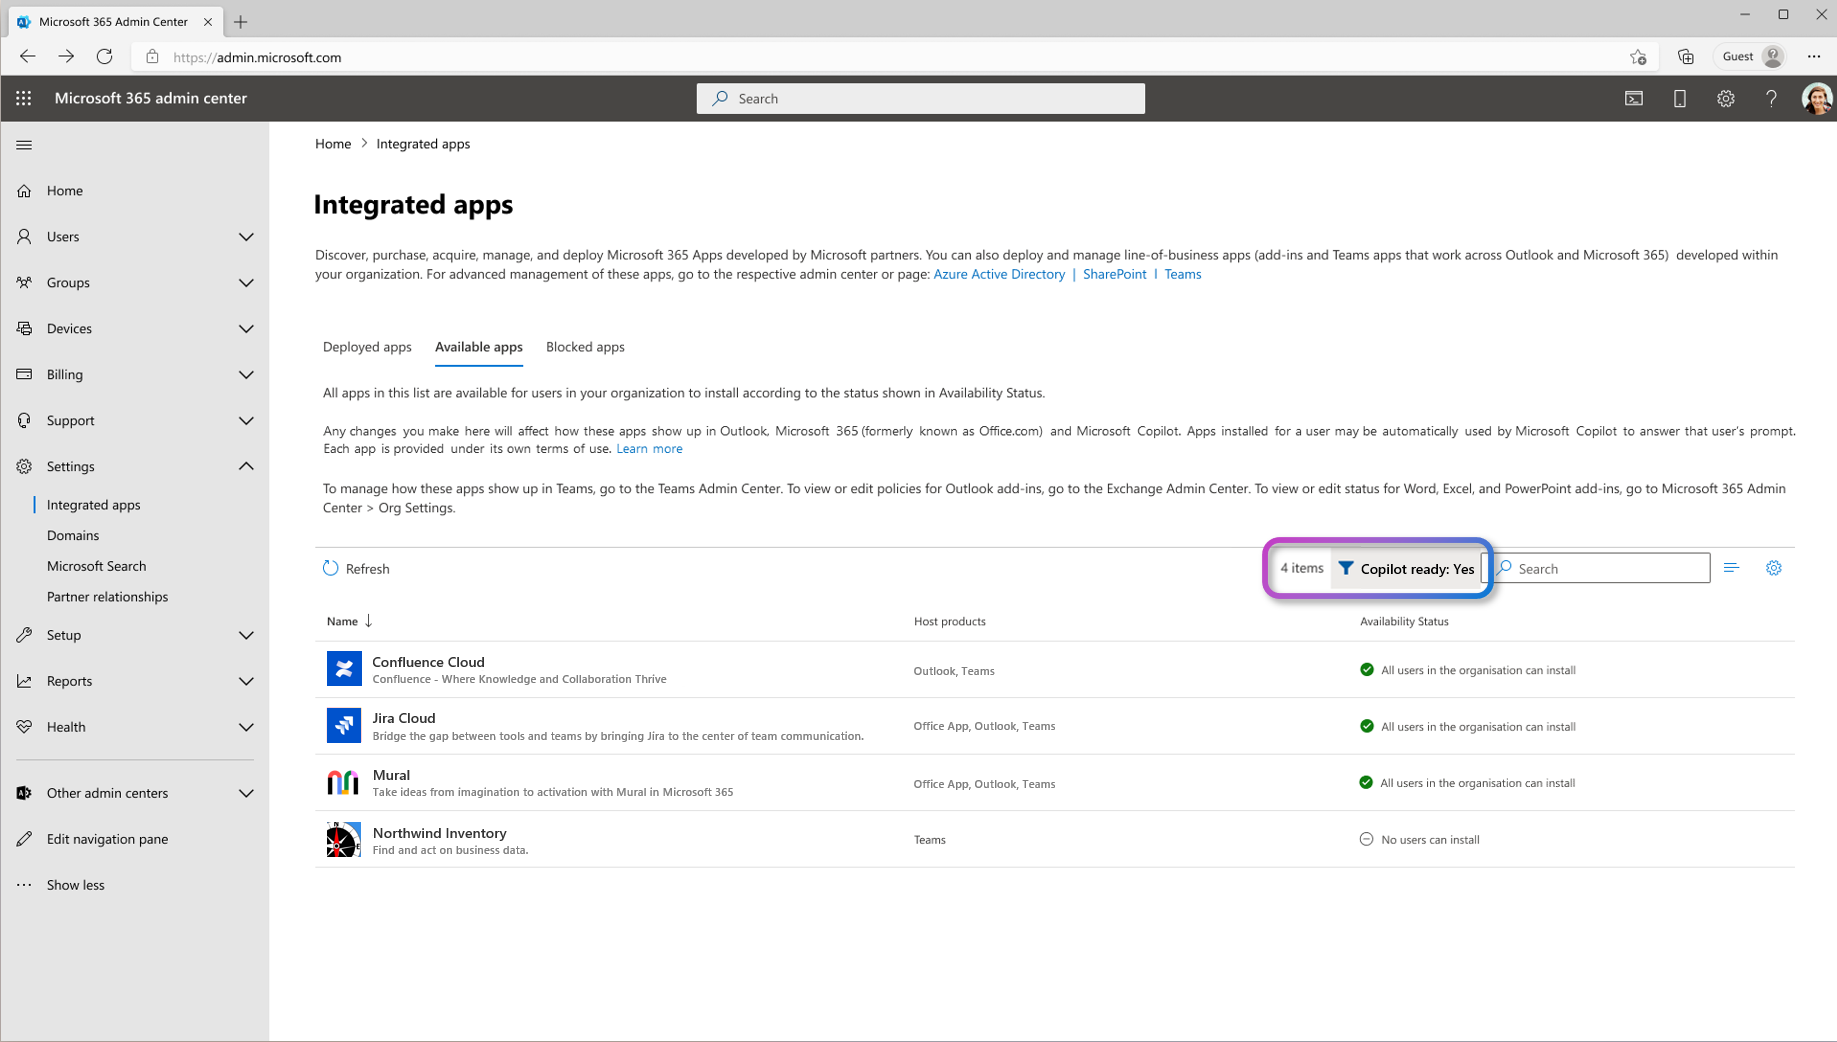 A screenshot of Copilot ready integrated apps in the Microsoft 365 admin center.